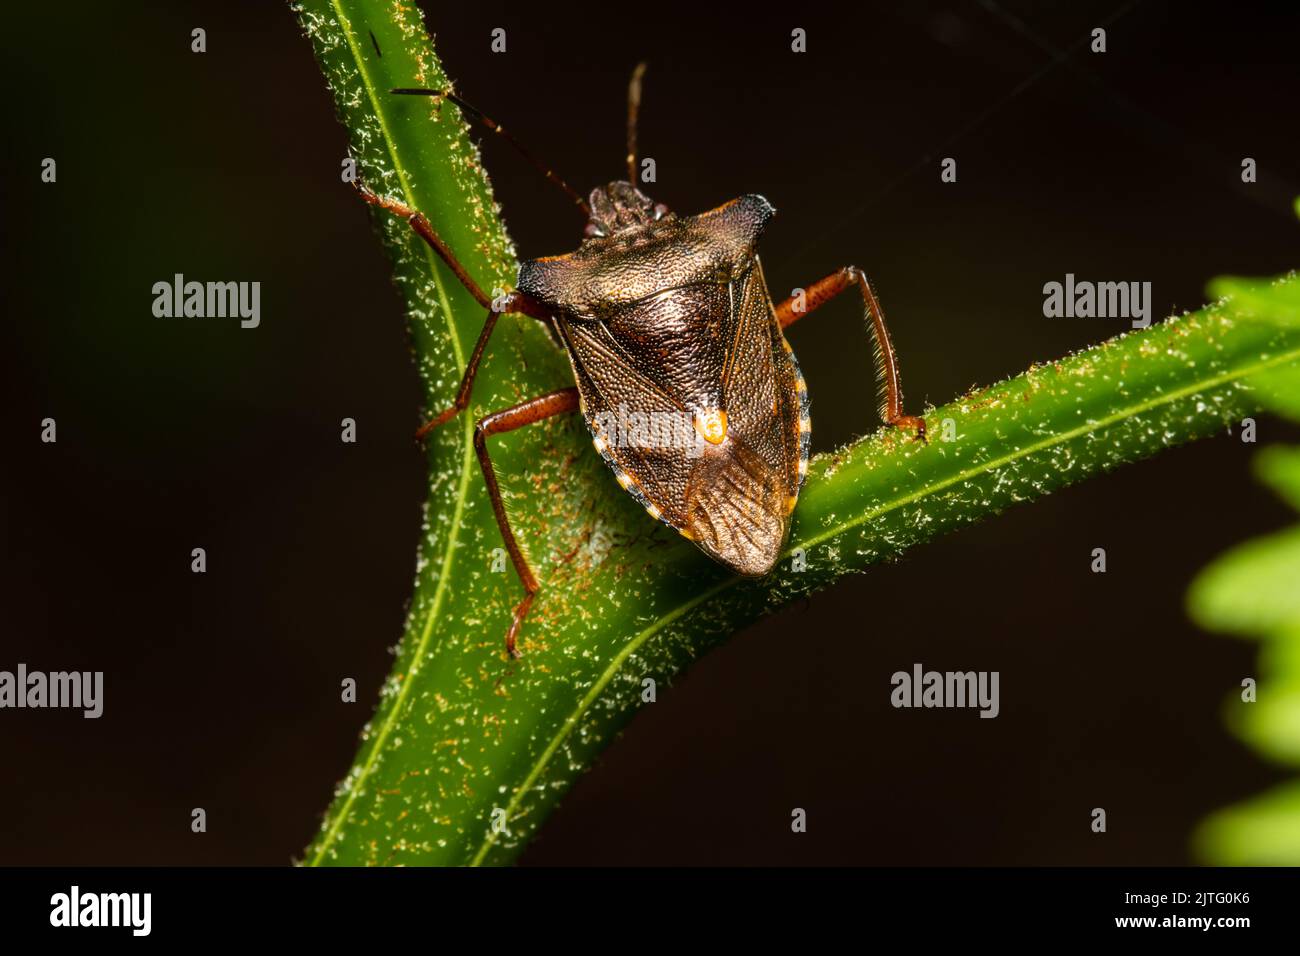 A forest bug also known as red-legged shieldbug, Pentatoma rufipes, perched on a plant stem. Stock Photo